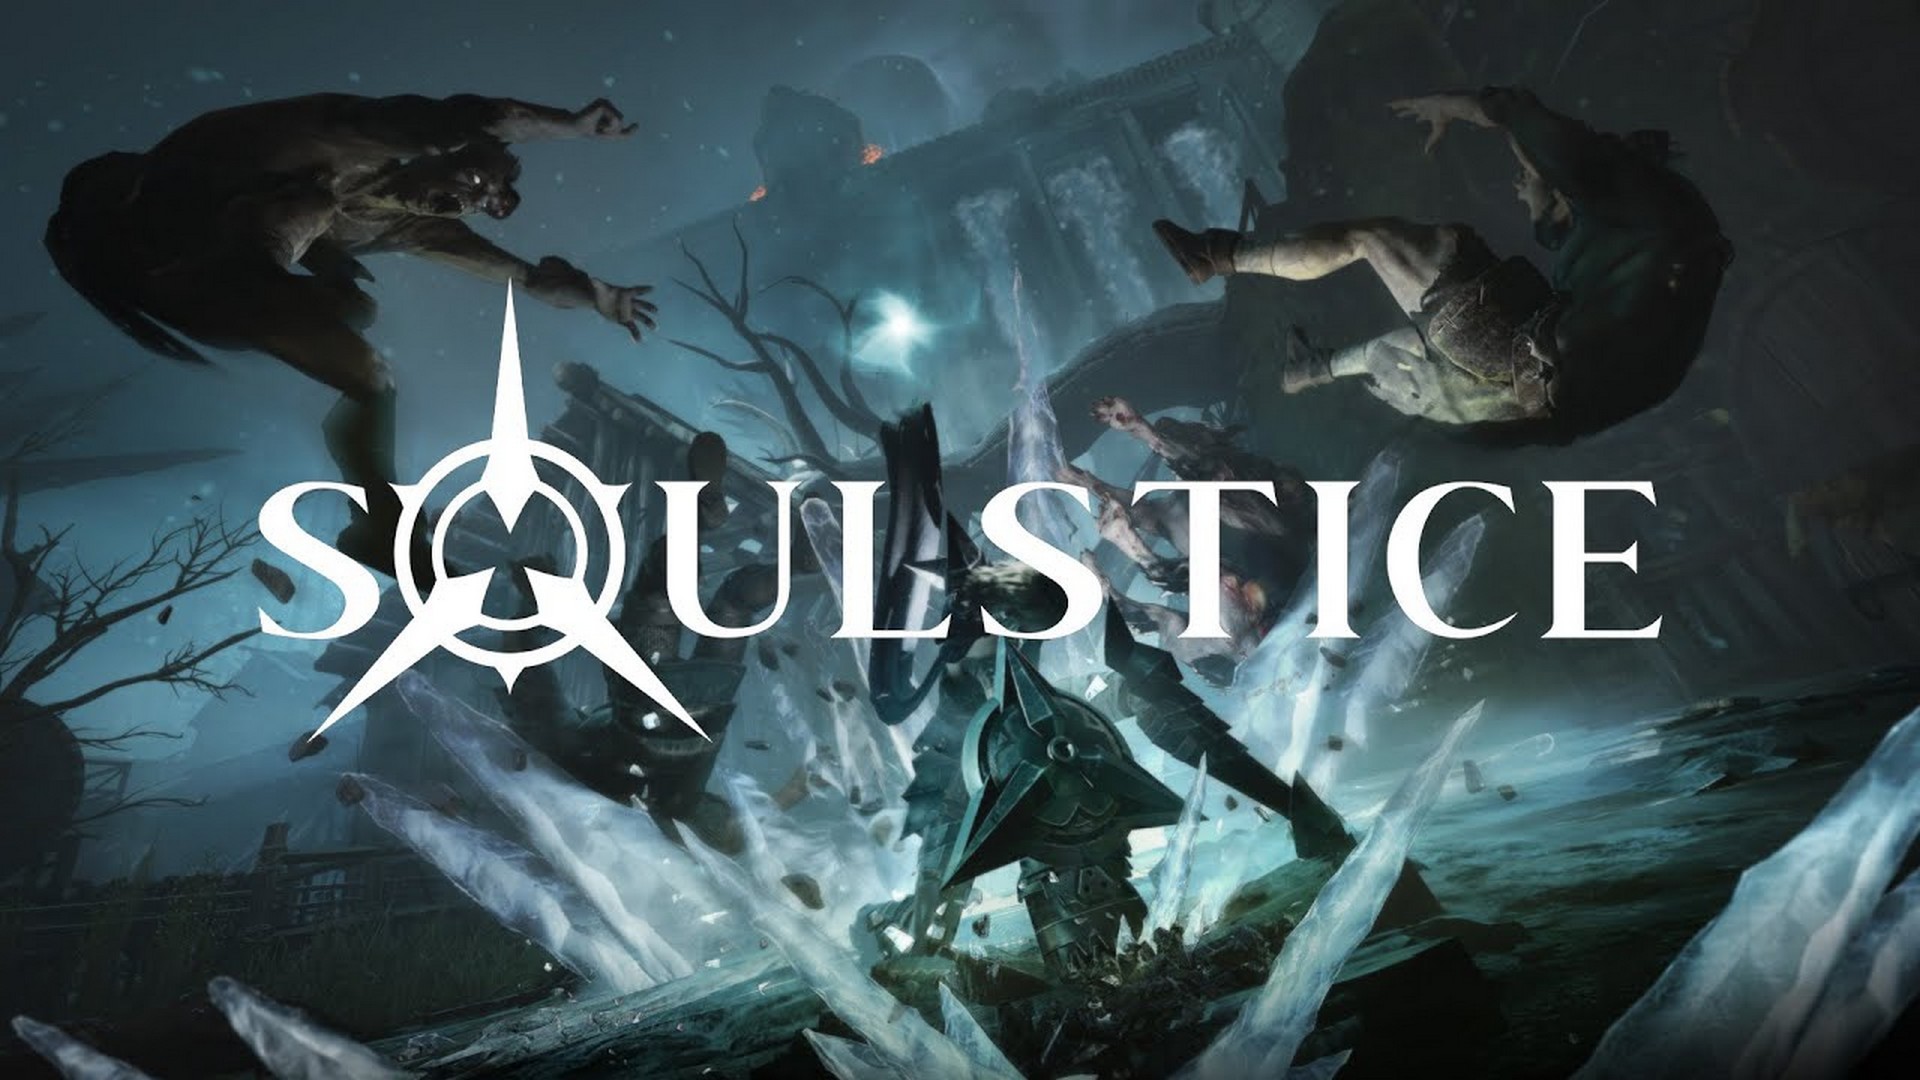 Soulstice Reviews - OpenCritic